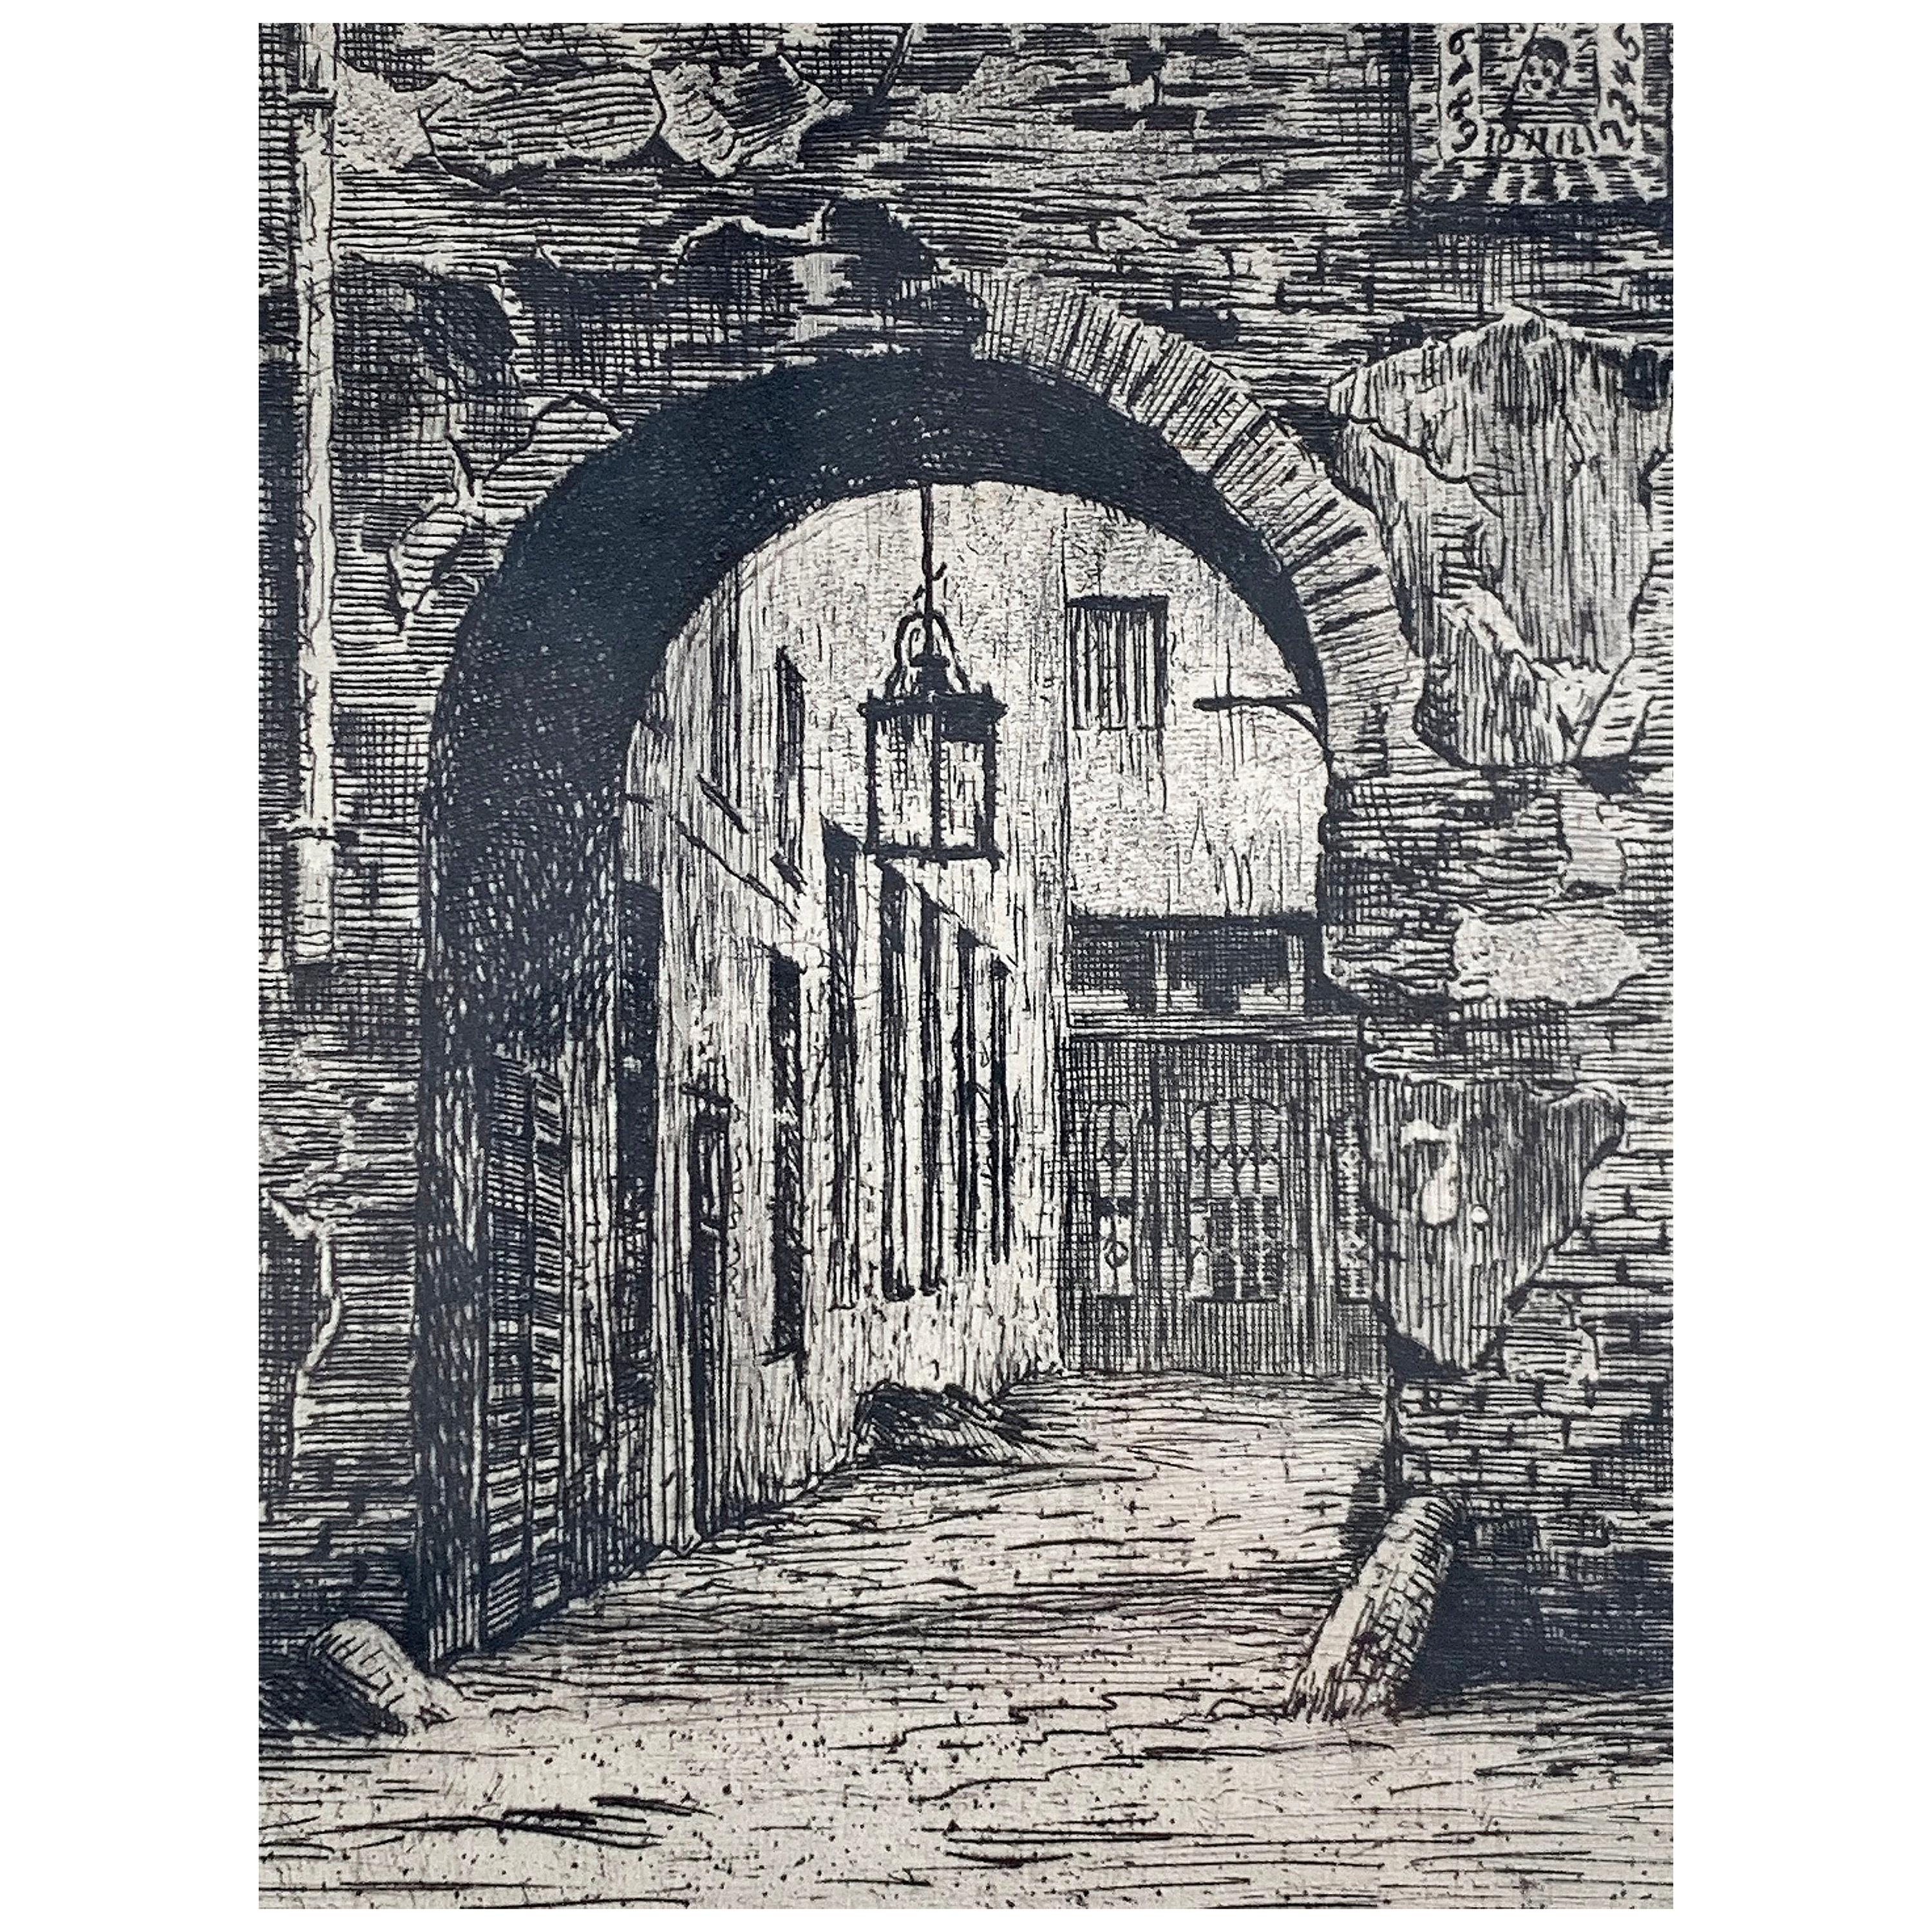 Lithograph Titled "Old Berlin" For Sale